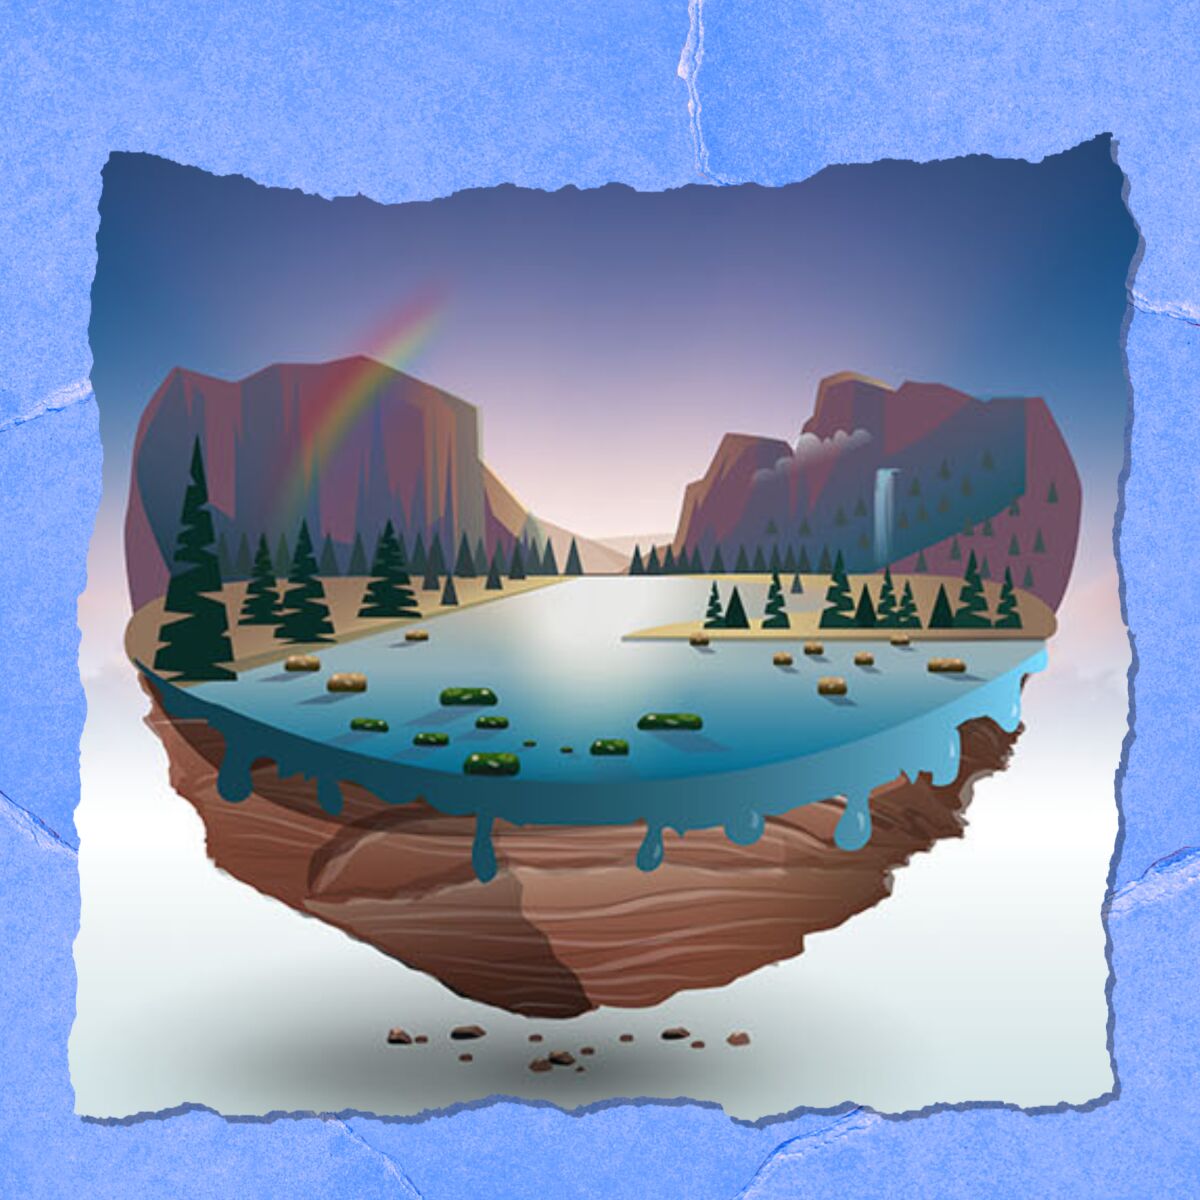 An illustration of lake and mountains in the shape of a heart.